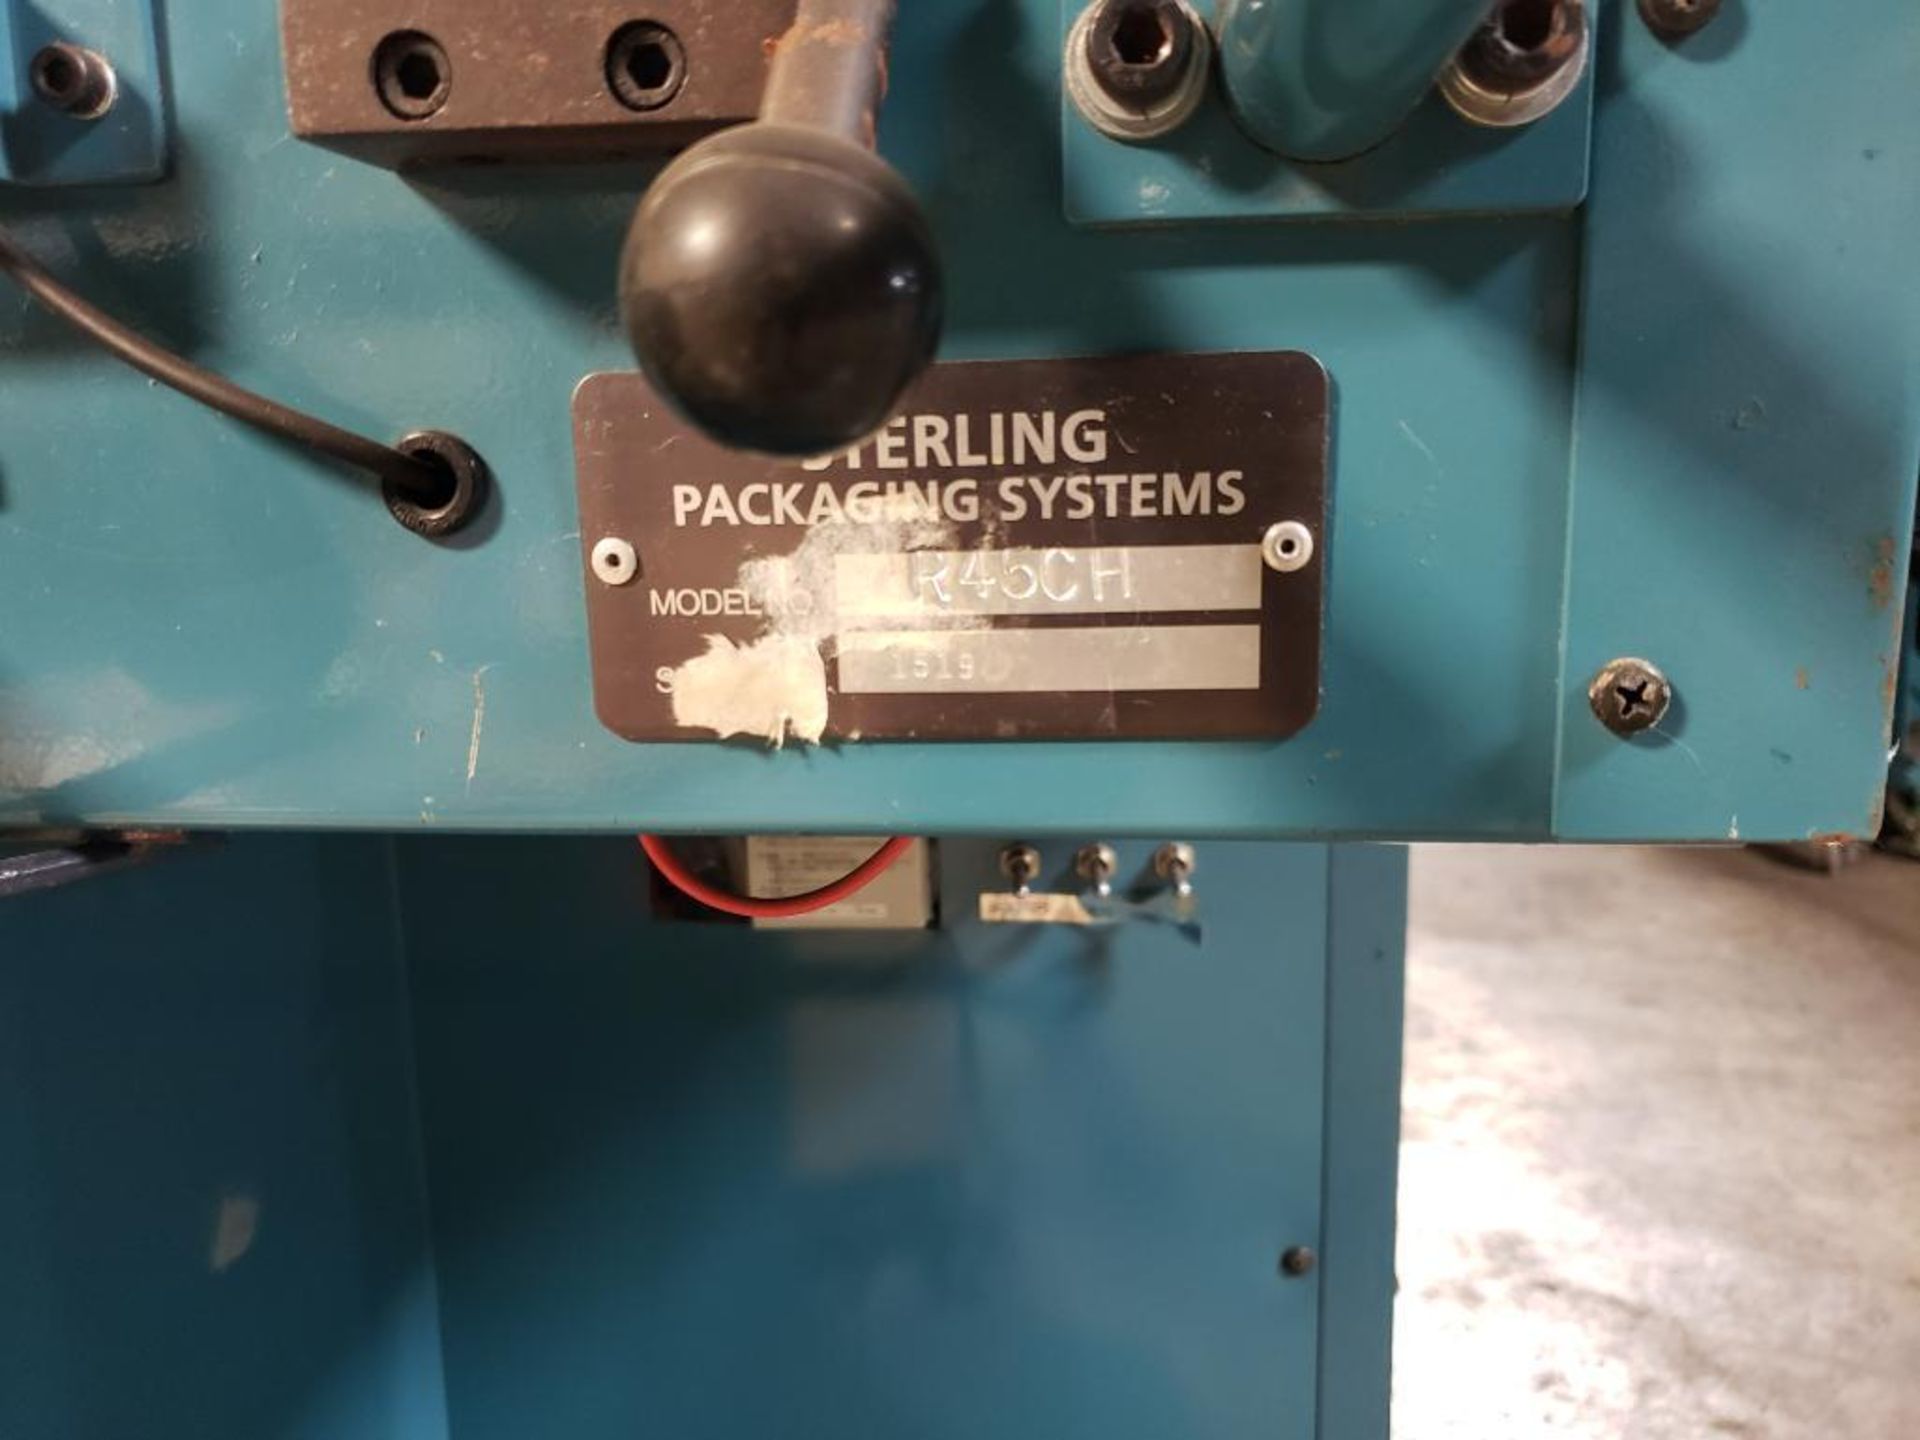 Sterling packaging systems automatic banding machine. Model MR45CH. - Image 11 of 11